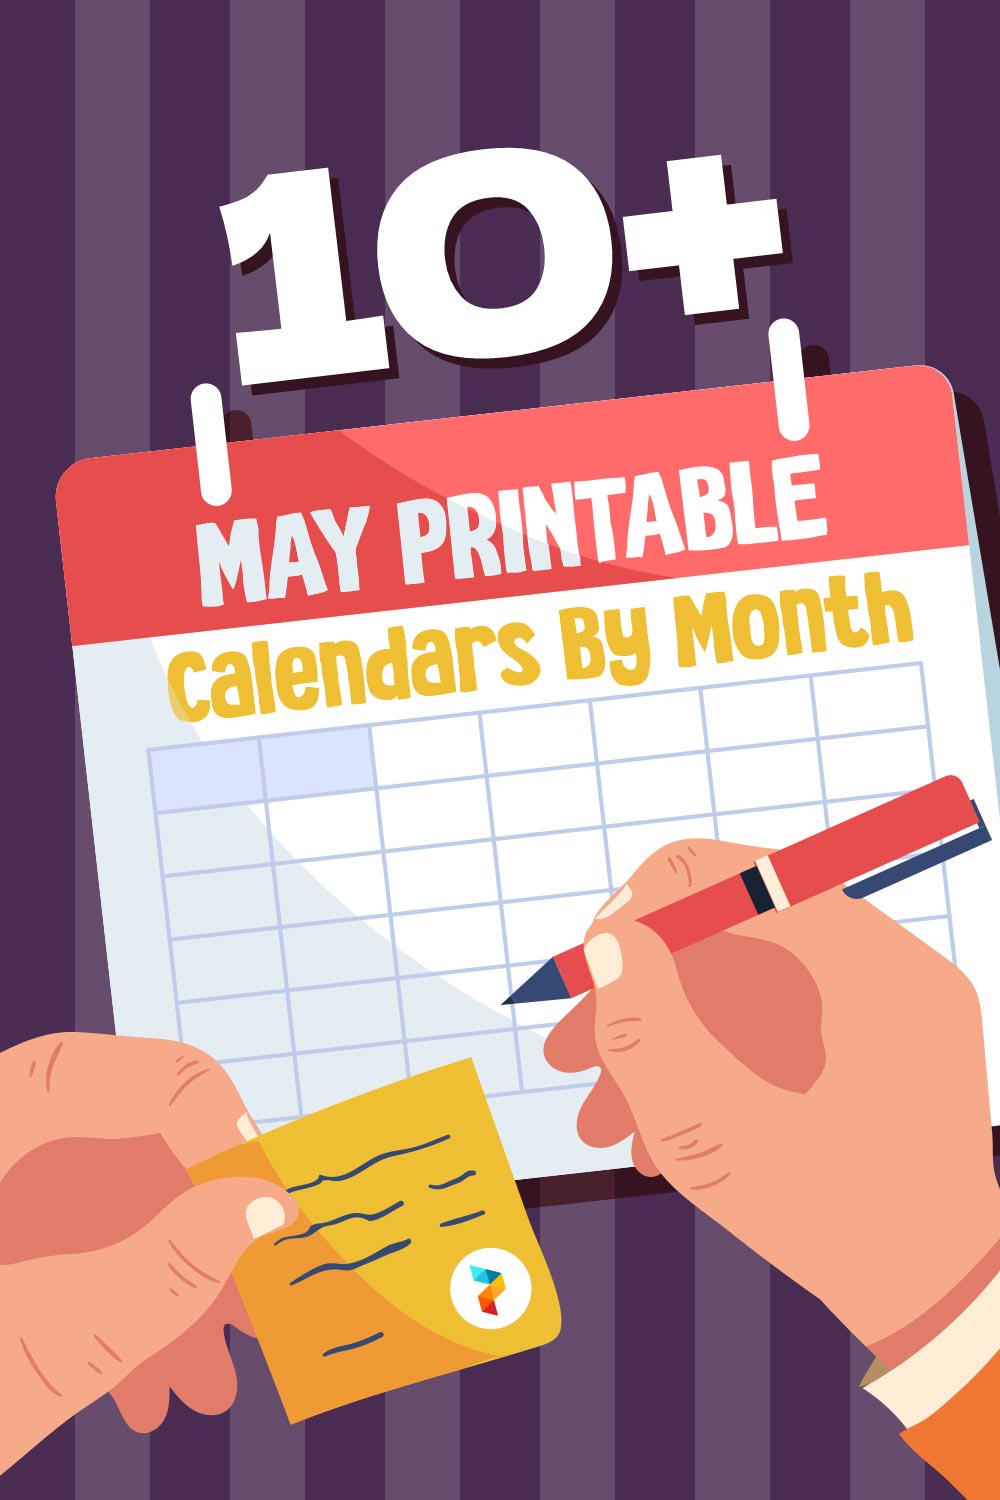 May Printable Calendars By Month